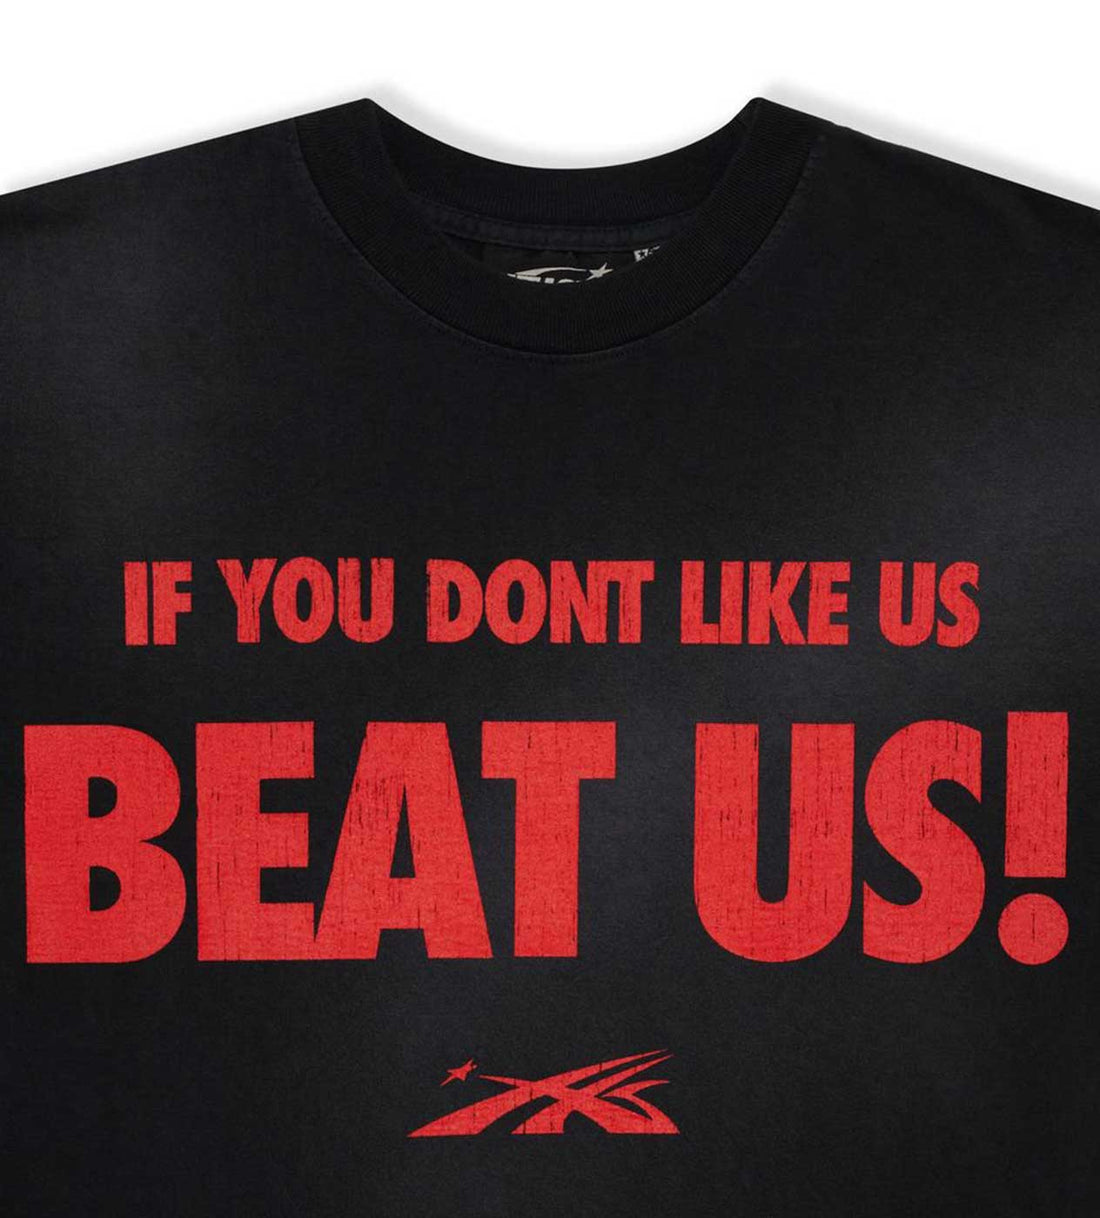 Hellstar Sports Beat Us! Tee (Black/Red) Front Detailed